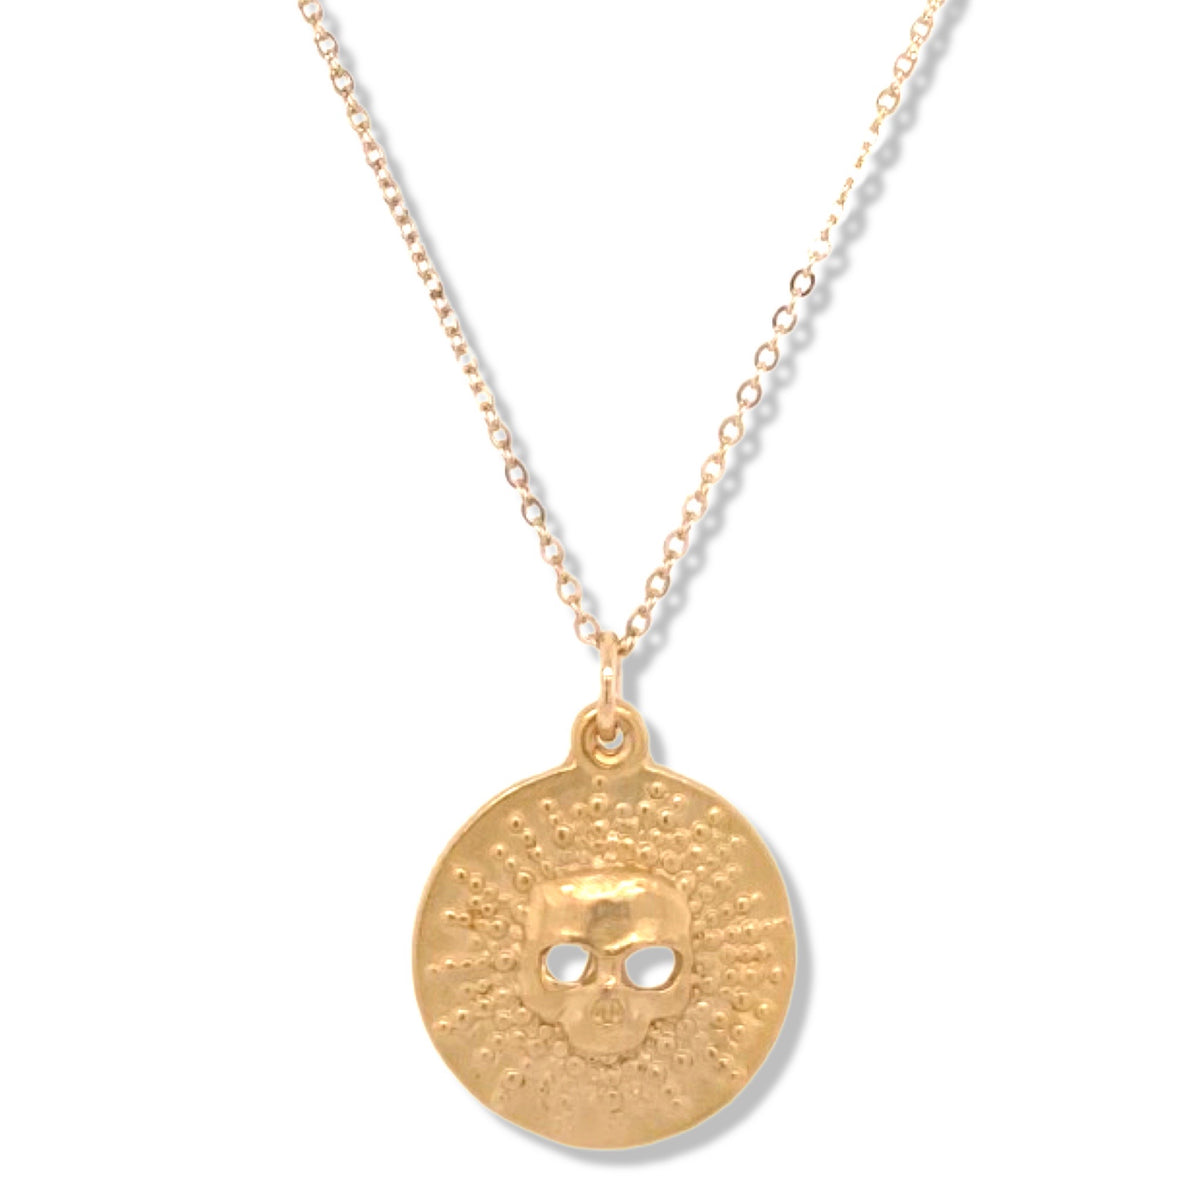 Dot Necklace in Gold | Keely Smith Jewelry |Nantucket